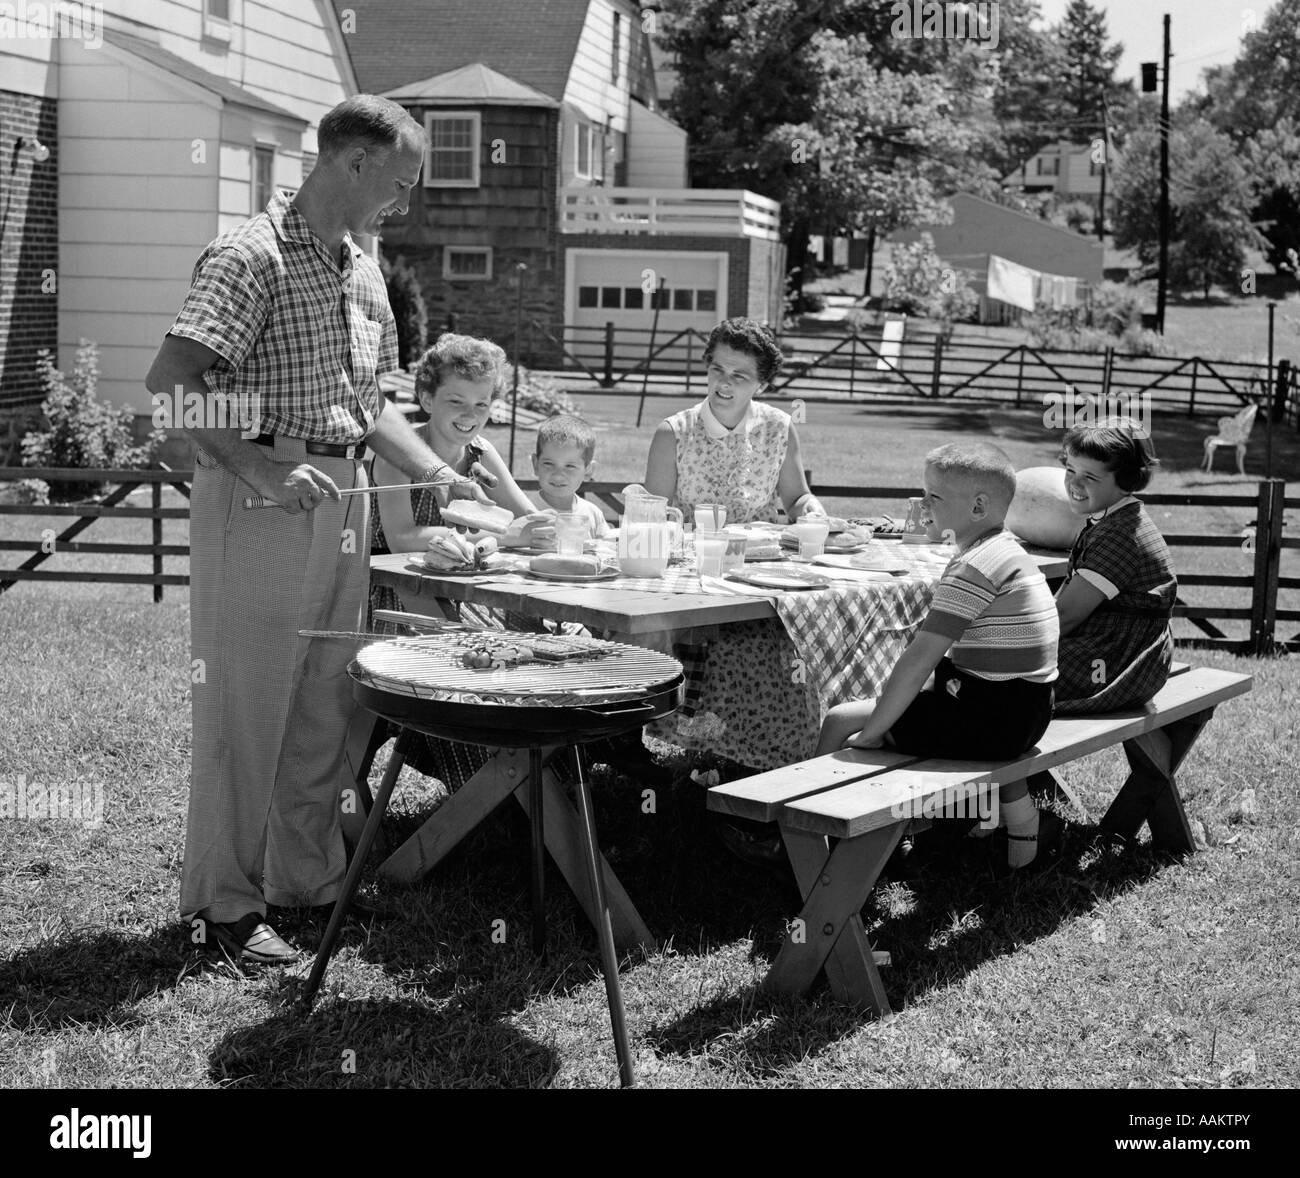 1950s FAMILY IN BACKYARD COOKING HOT DOGS SITTING AT PICNIC TABLE Stock Photo